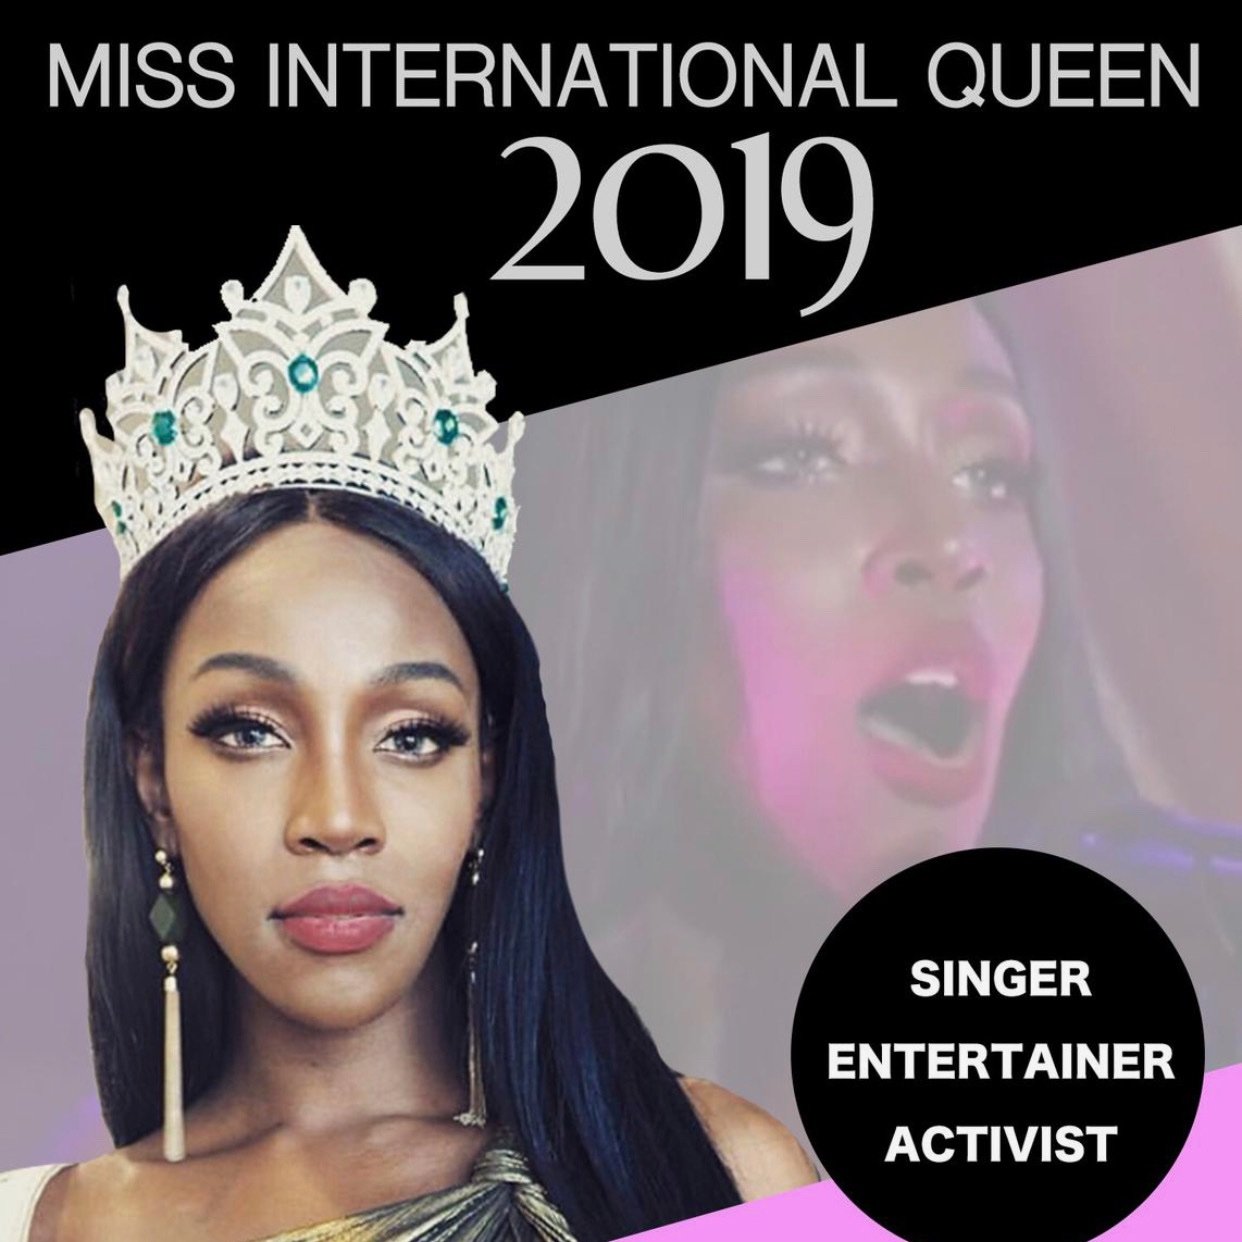 Miss international Queen 2019! I’m the first transgender women of African descent to win I’m also a singer model and lip sync artist and hiv tester